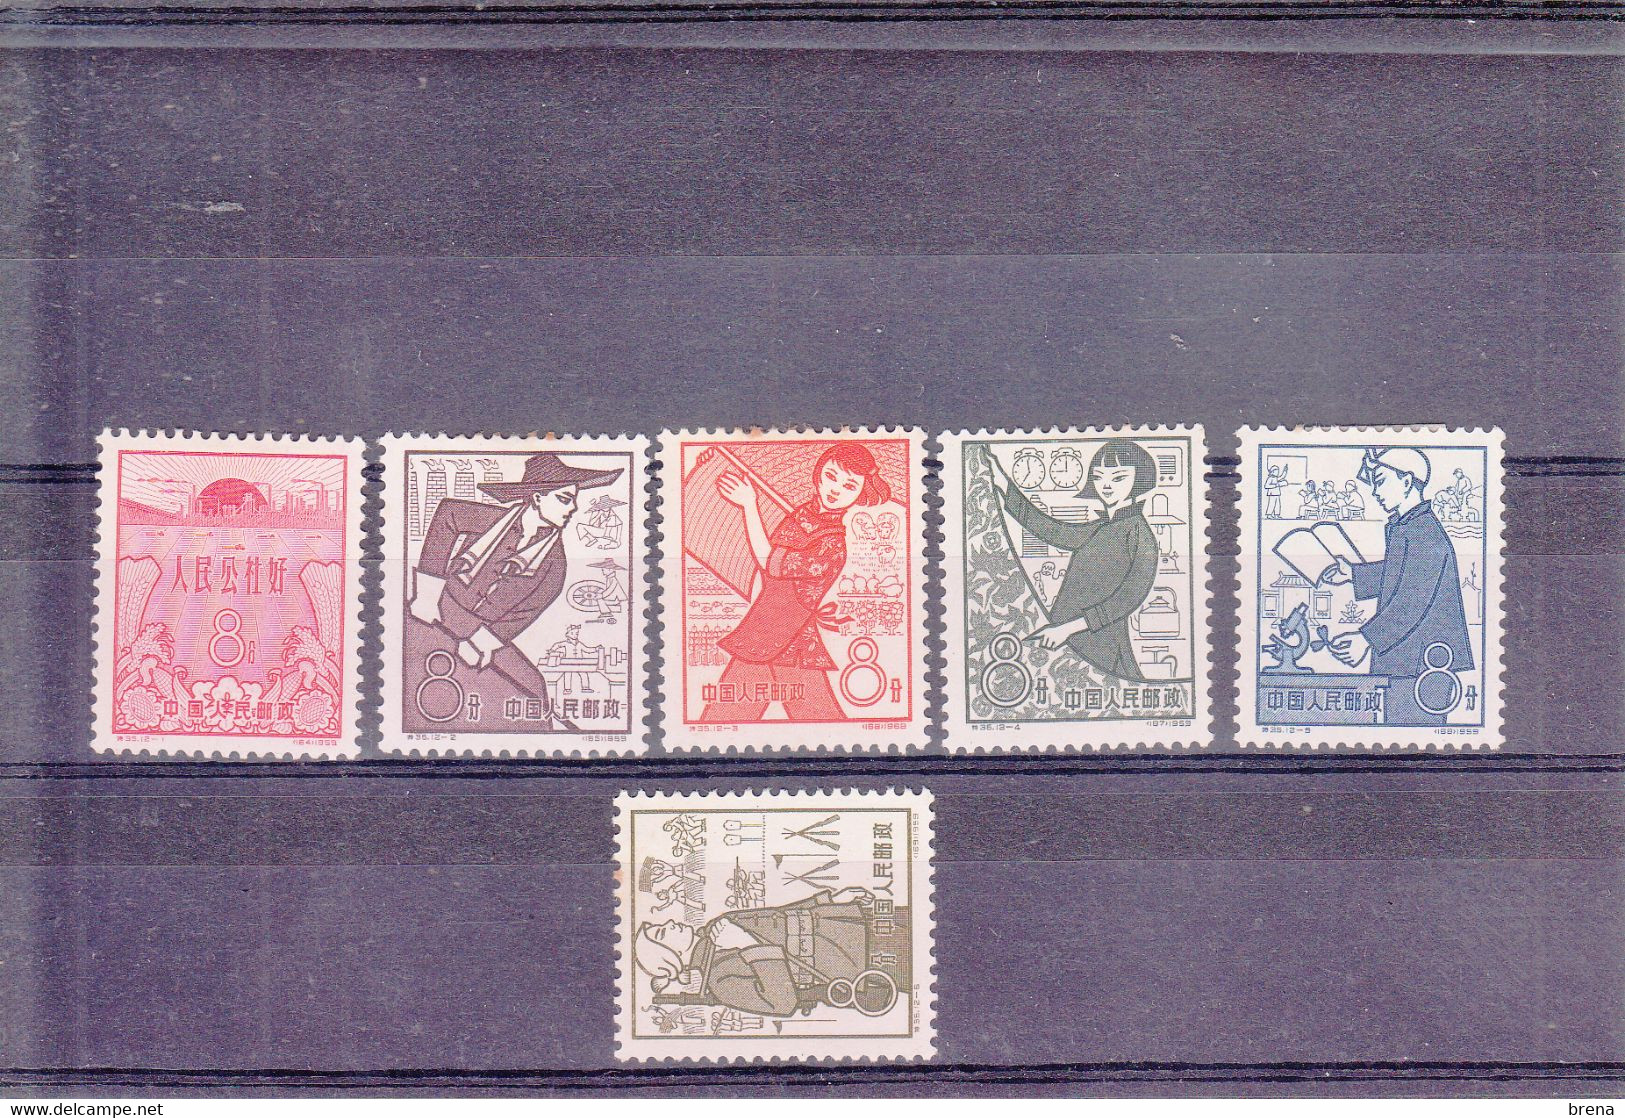 CHINE 1959   COMMUNES POPULAIRES   N°1212 A 1217  SERIE INCOMPLETE  NEUFS X - Nuovi